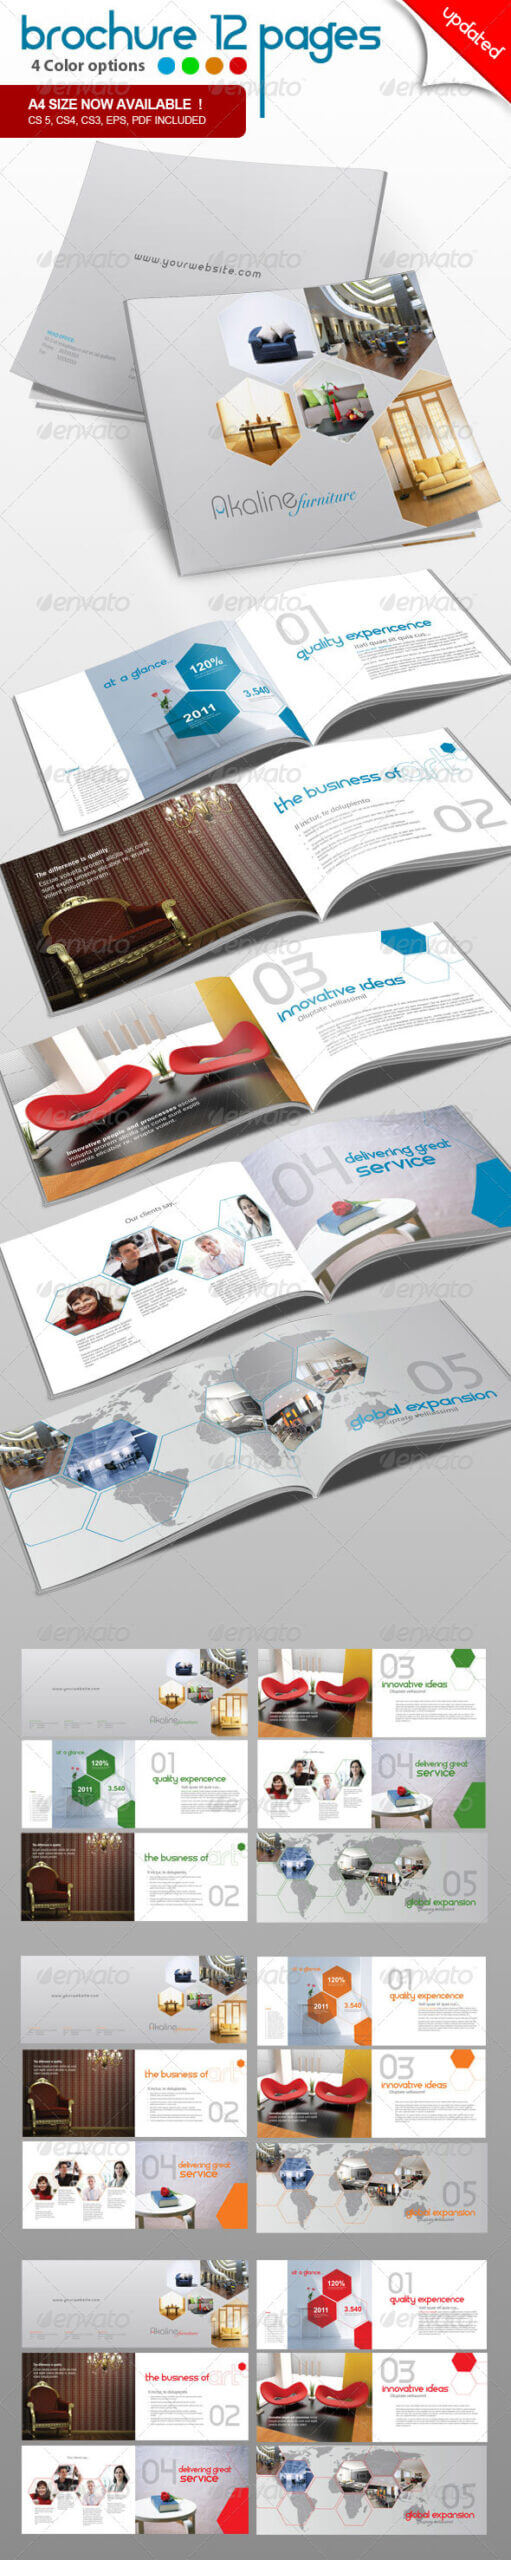 Corporate Brochure 12 Pages – Graphicriver Item For Sale Intended For 12 Page Brochure Template